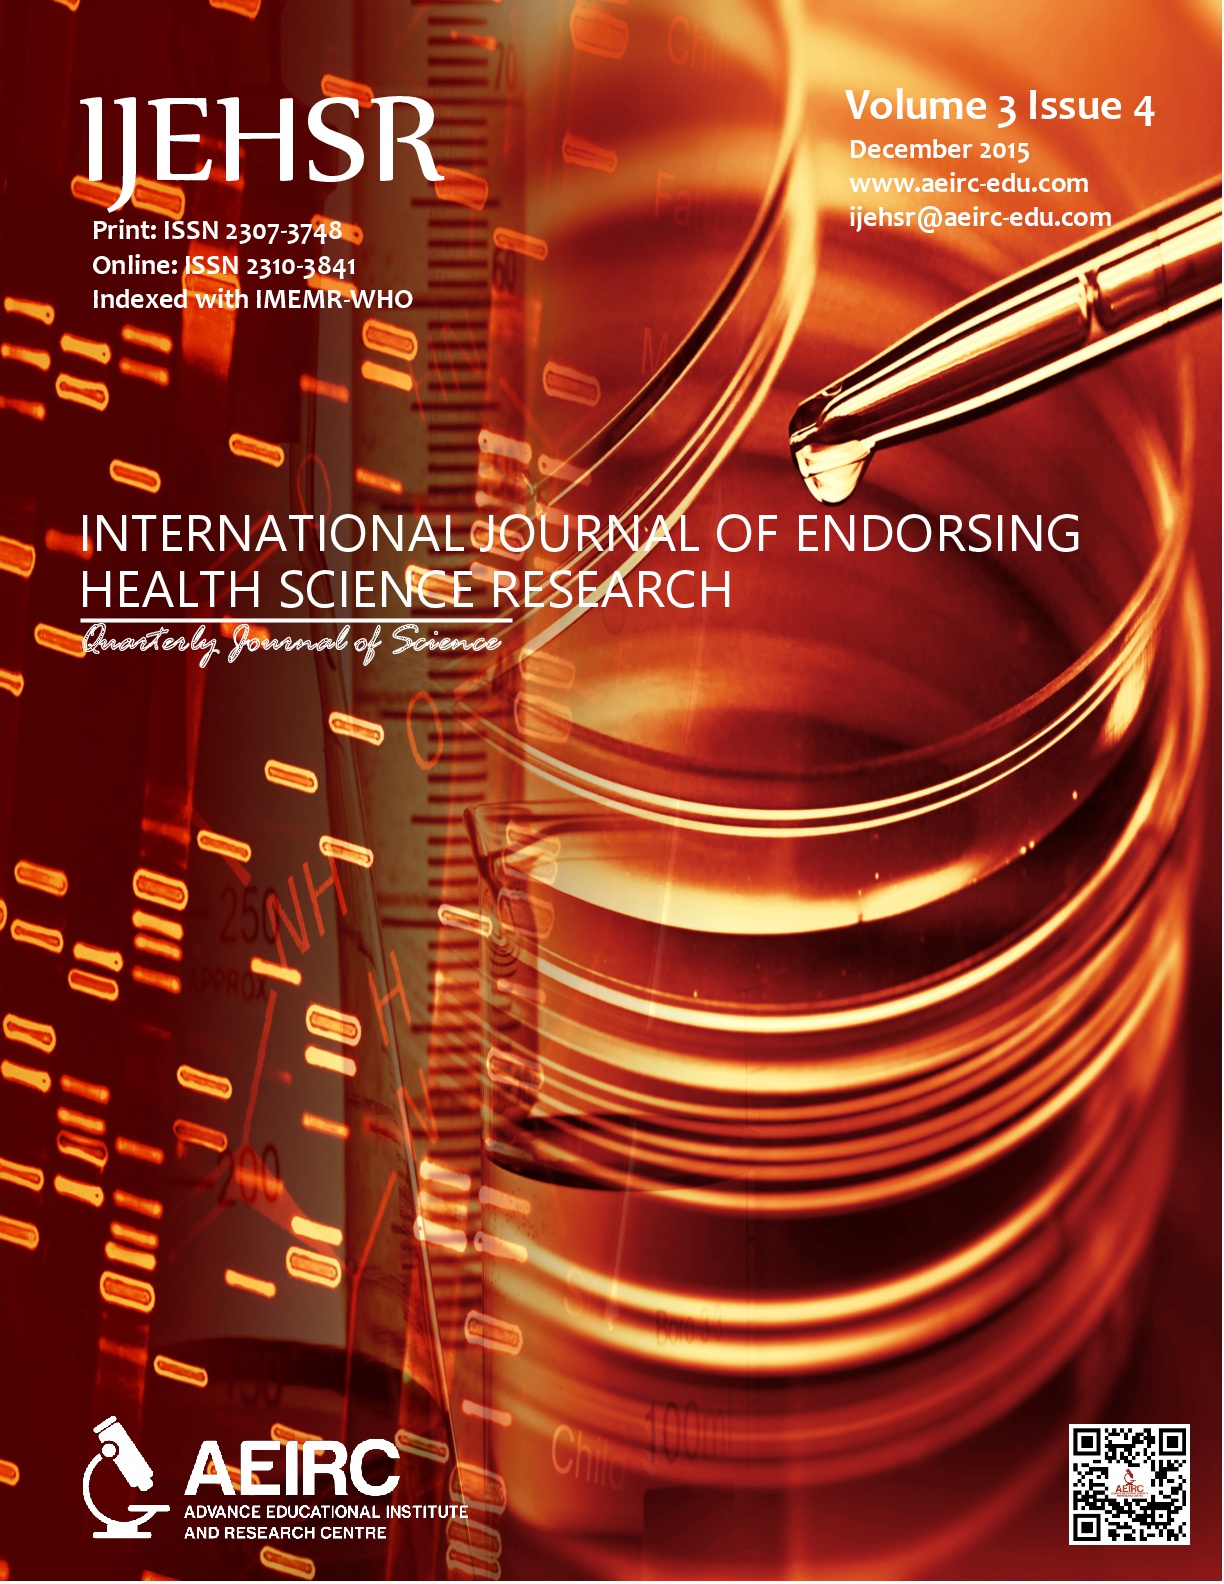 					View Vol. 3 No. 4 (2015): International Journal of Endorsing Health Science Research
				